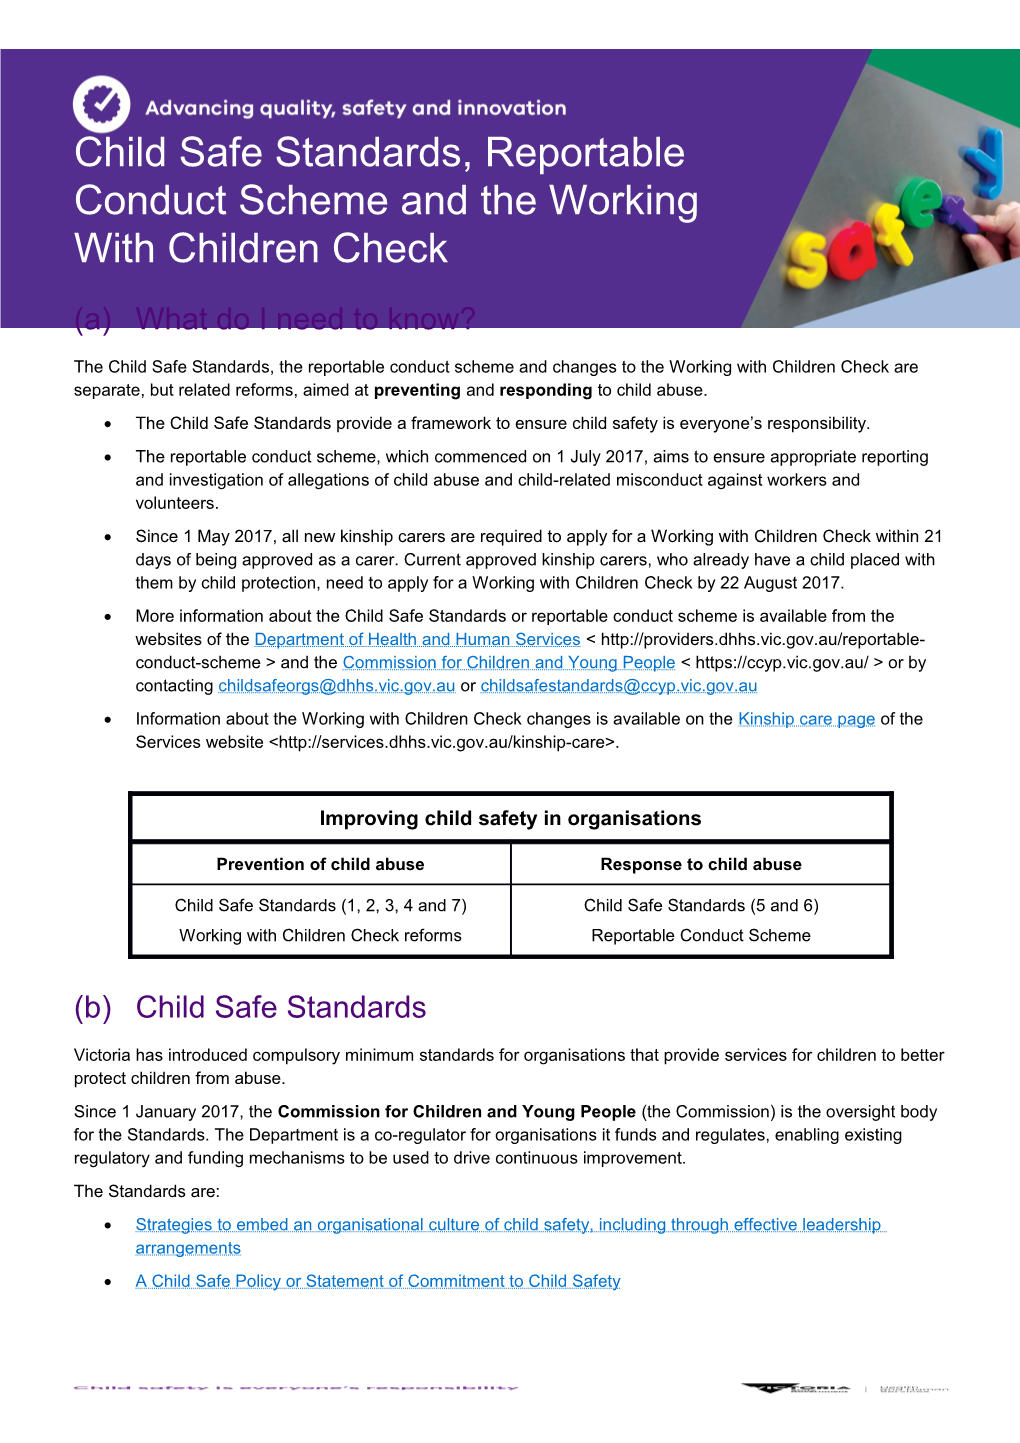 Child Safe Standards, Reportable Conduct Scheme and the Working with Children Check